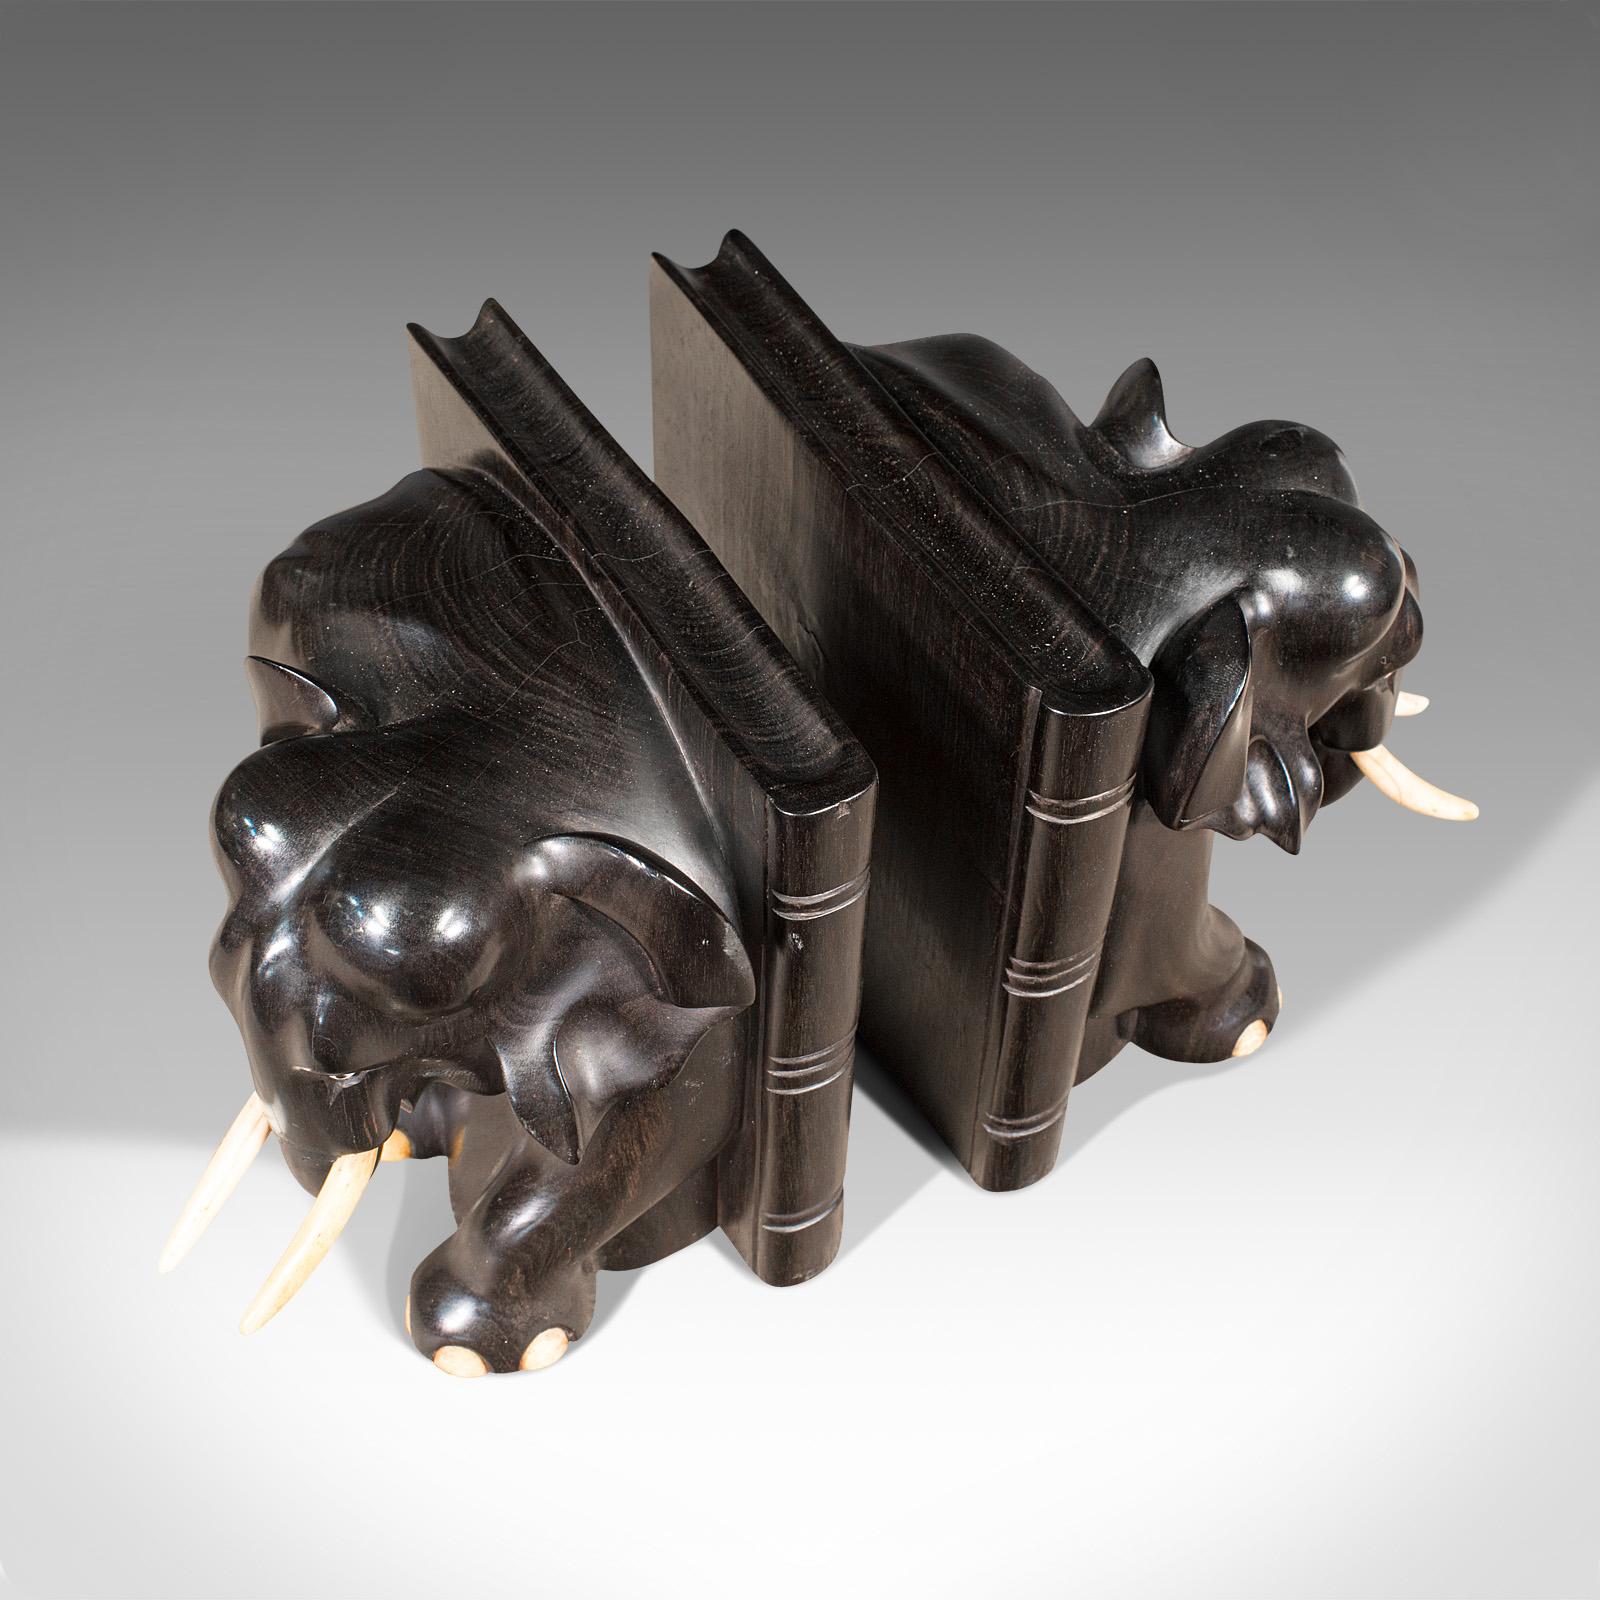 Pair of Antique Elephant Bookends, English, Ebony, Carved, Book Rest, Victorian For Sale 4